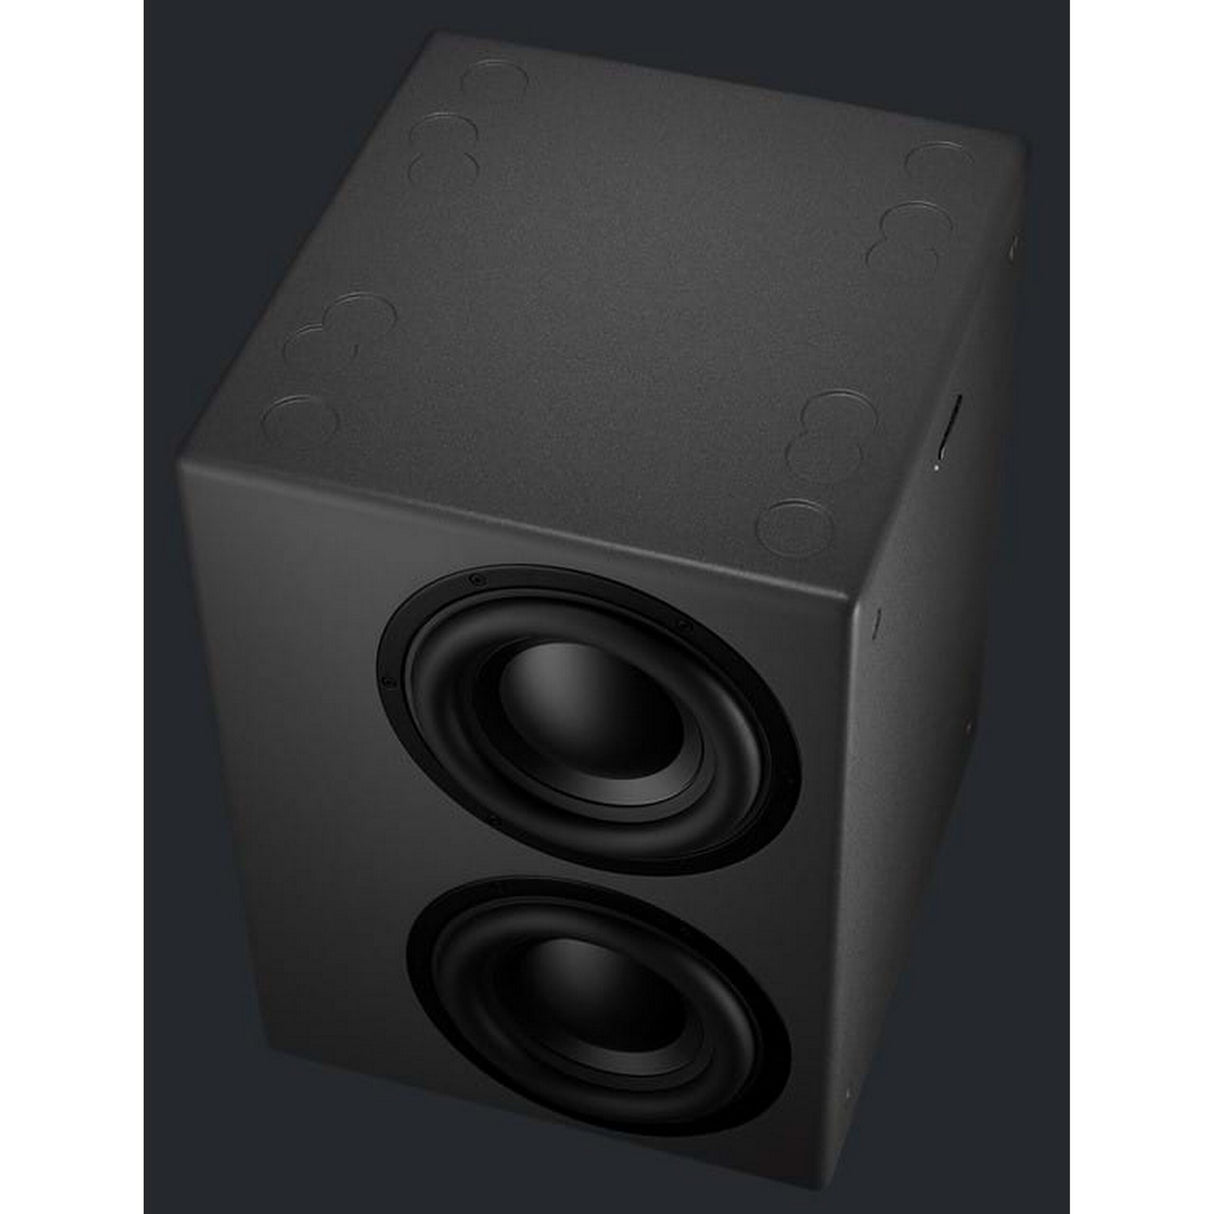 Dynaudio Core SUB 500W 9 Inch Subwoofer for CORE Systems